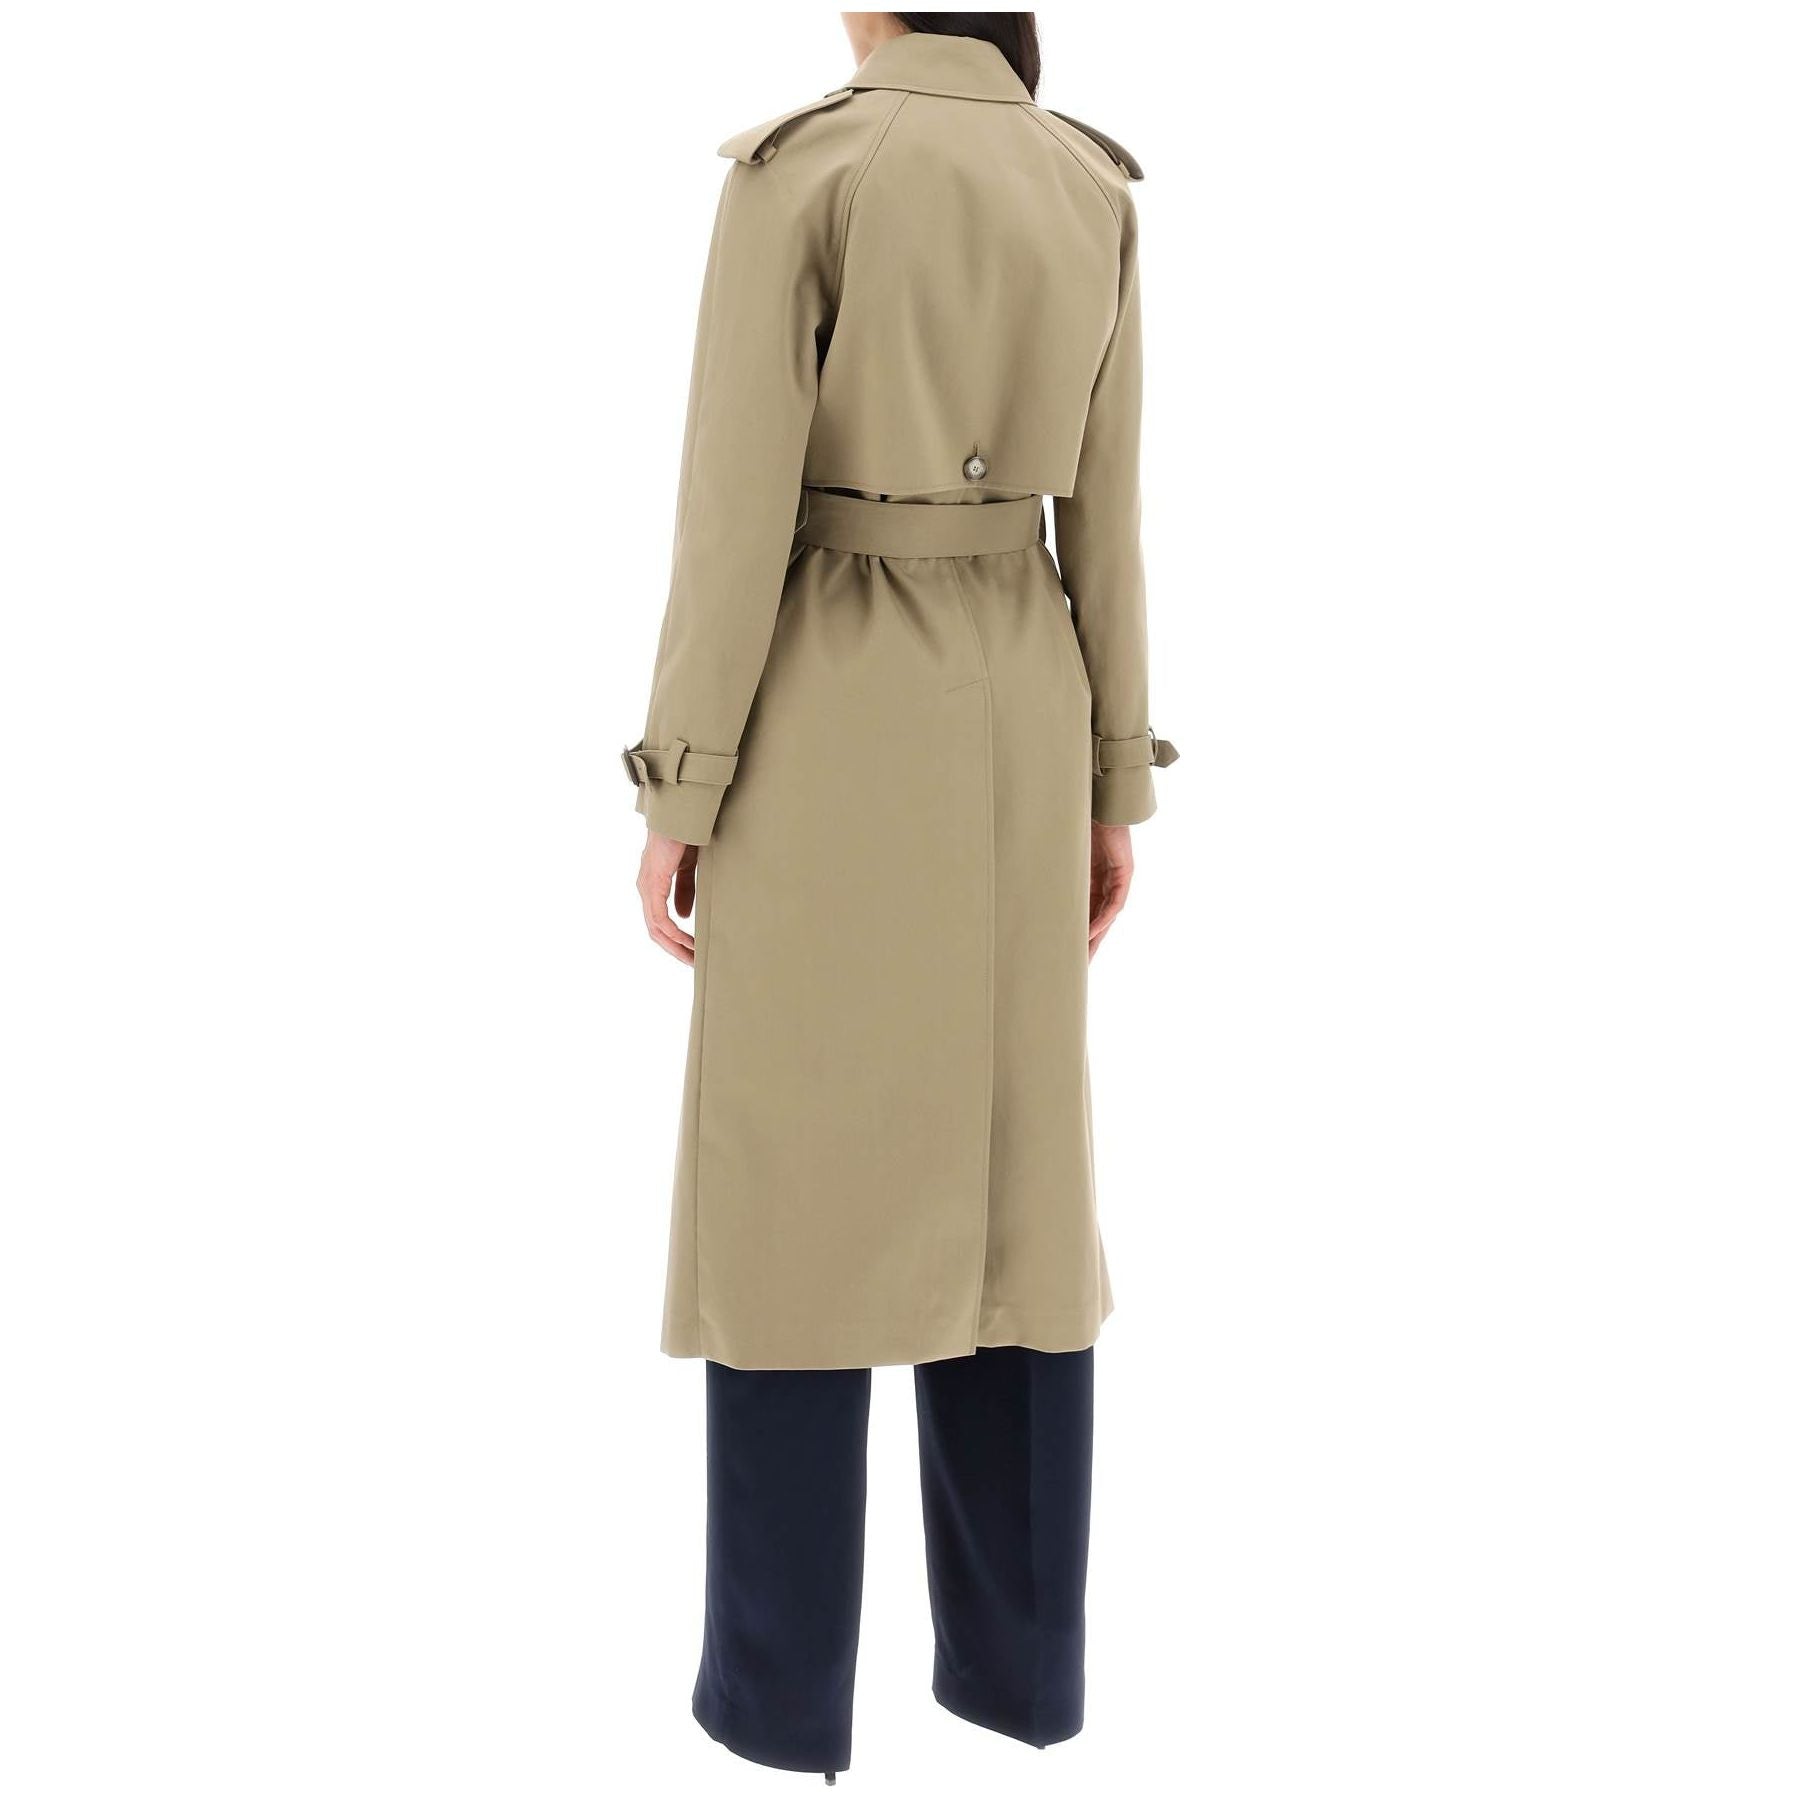 Organic Cotton Double Breasted Trench